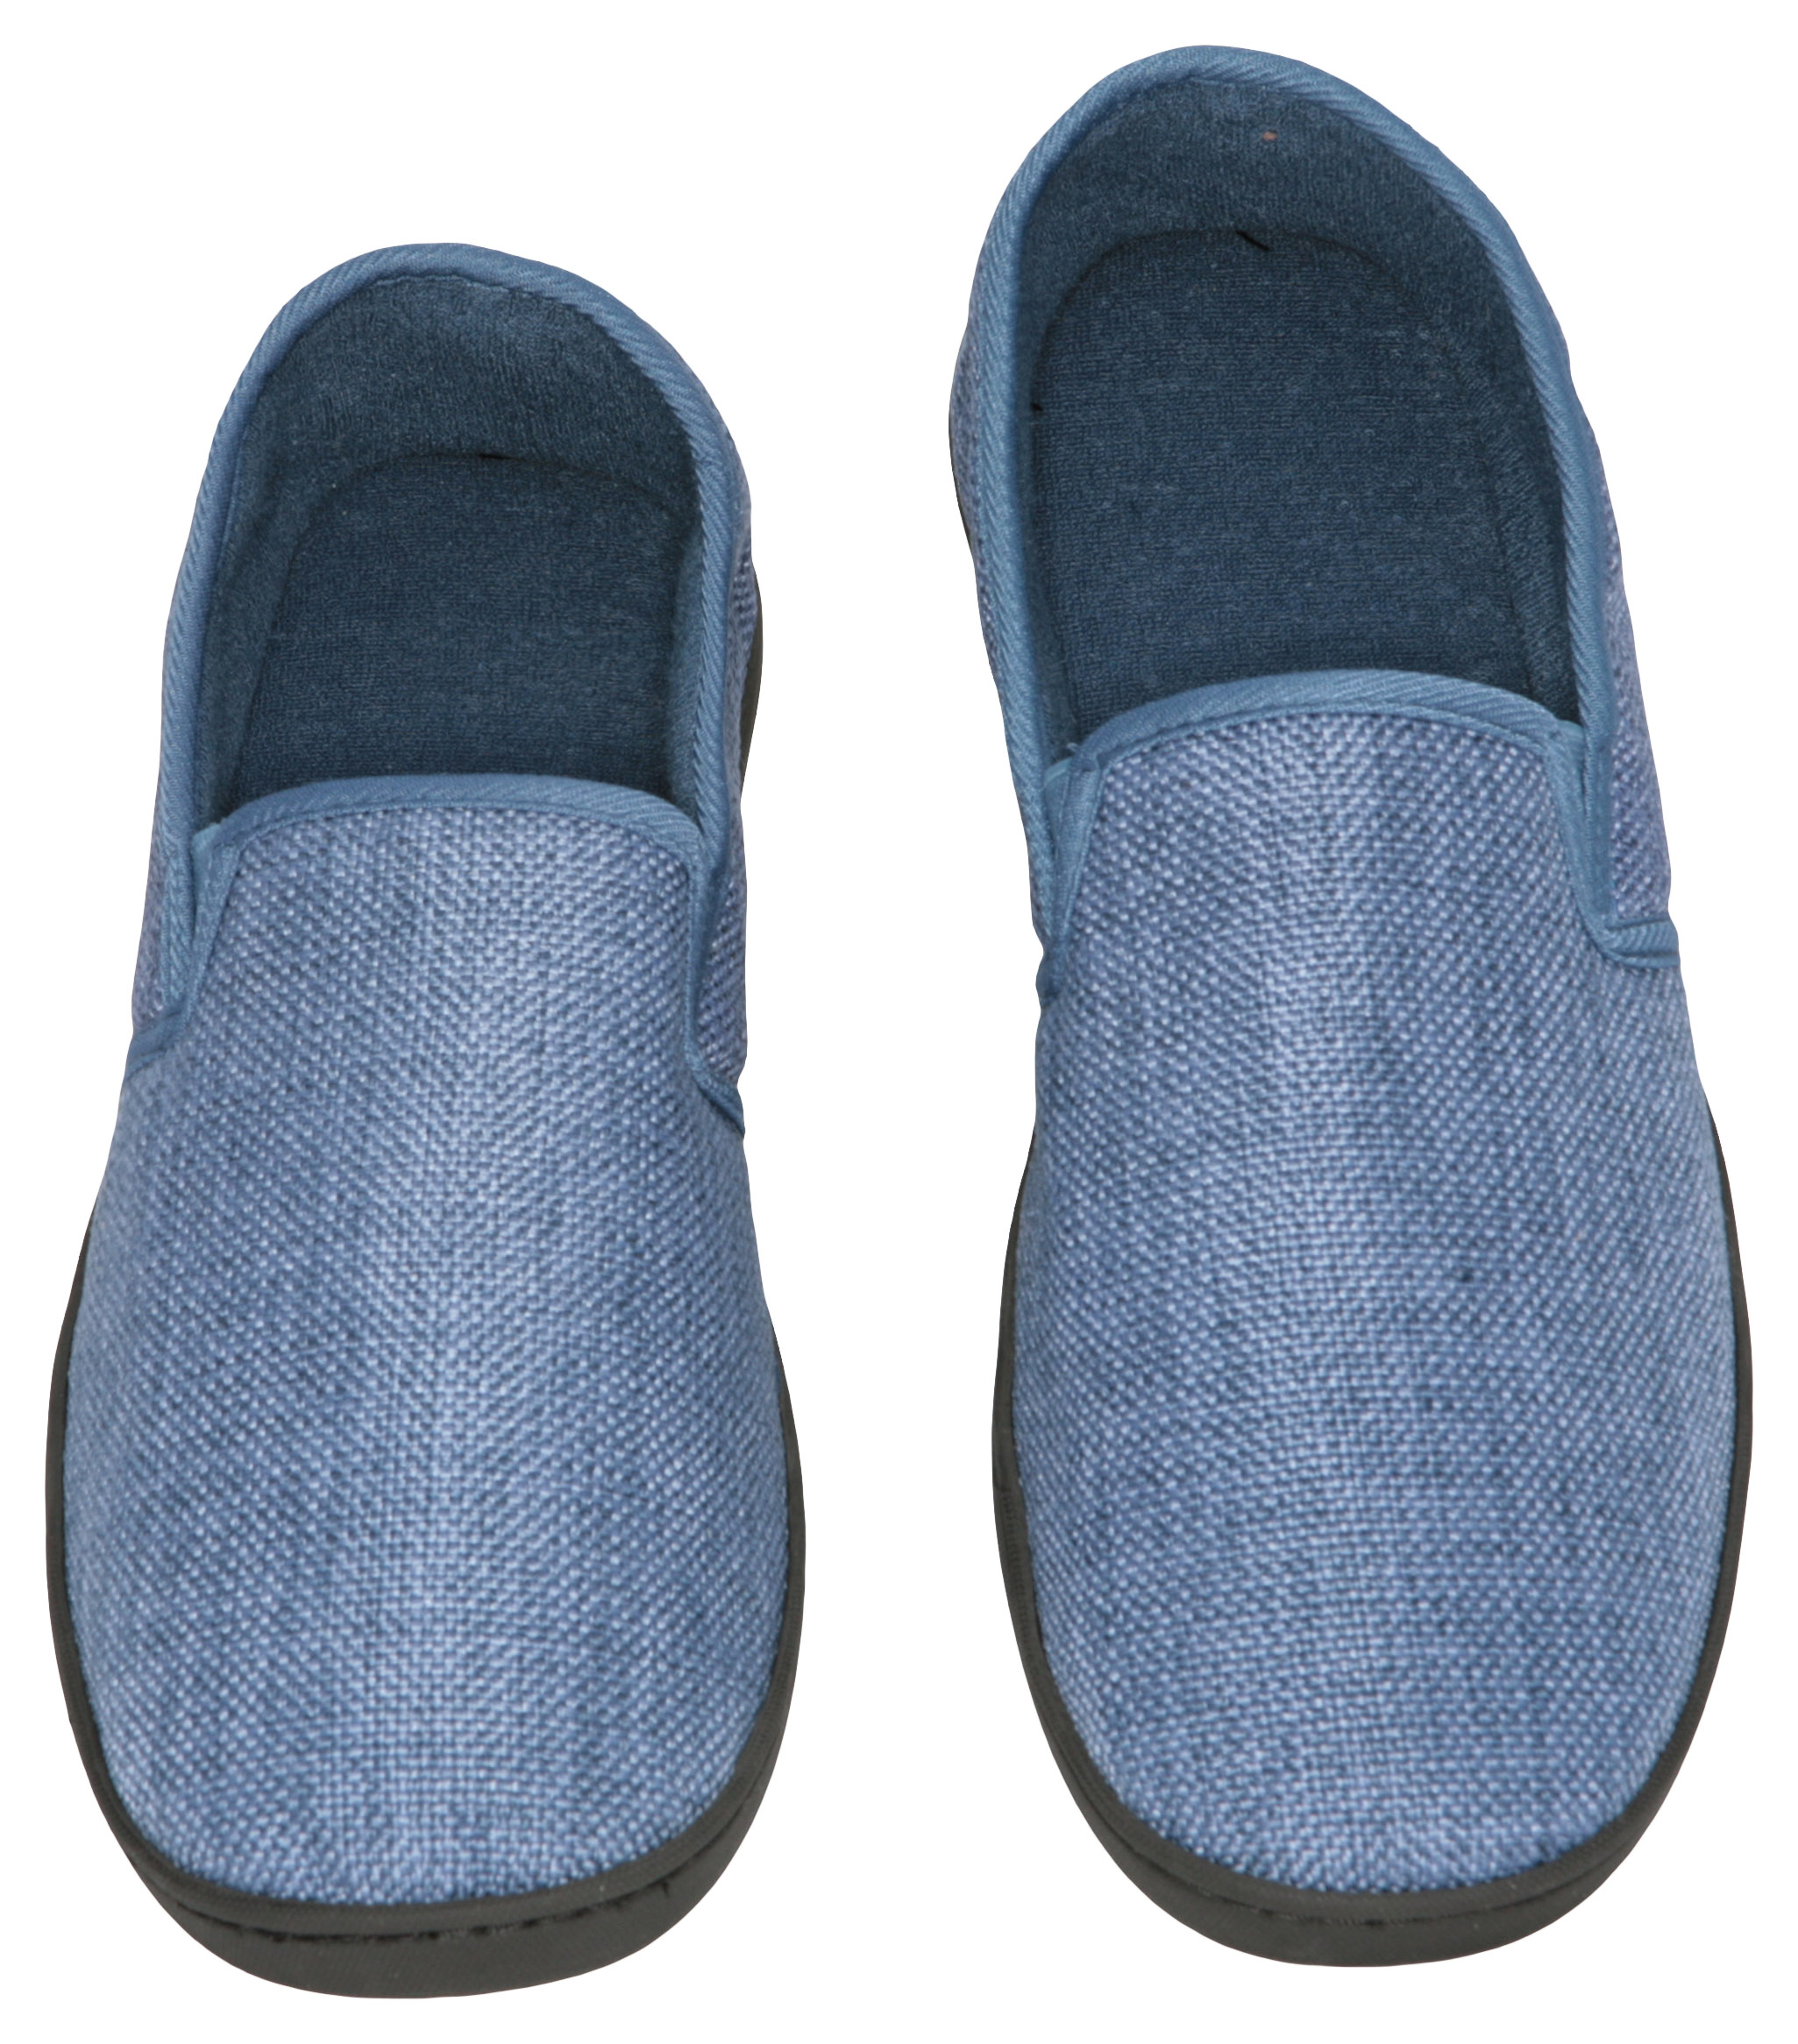 Deluxe Comfort Men's Memory Foam Slipper, Size 11-12 – Soft Linen 120D SBR Insole and Rubber Outsole – Pure Suede Shoes – Non-Marking Sole – Men's Slippers, Blue - image 3 of 5